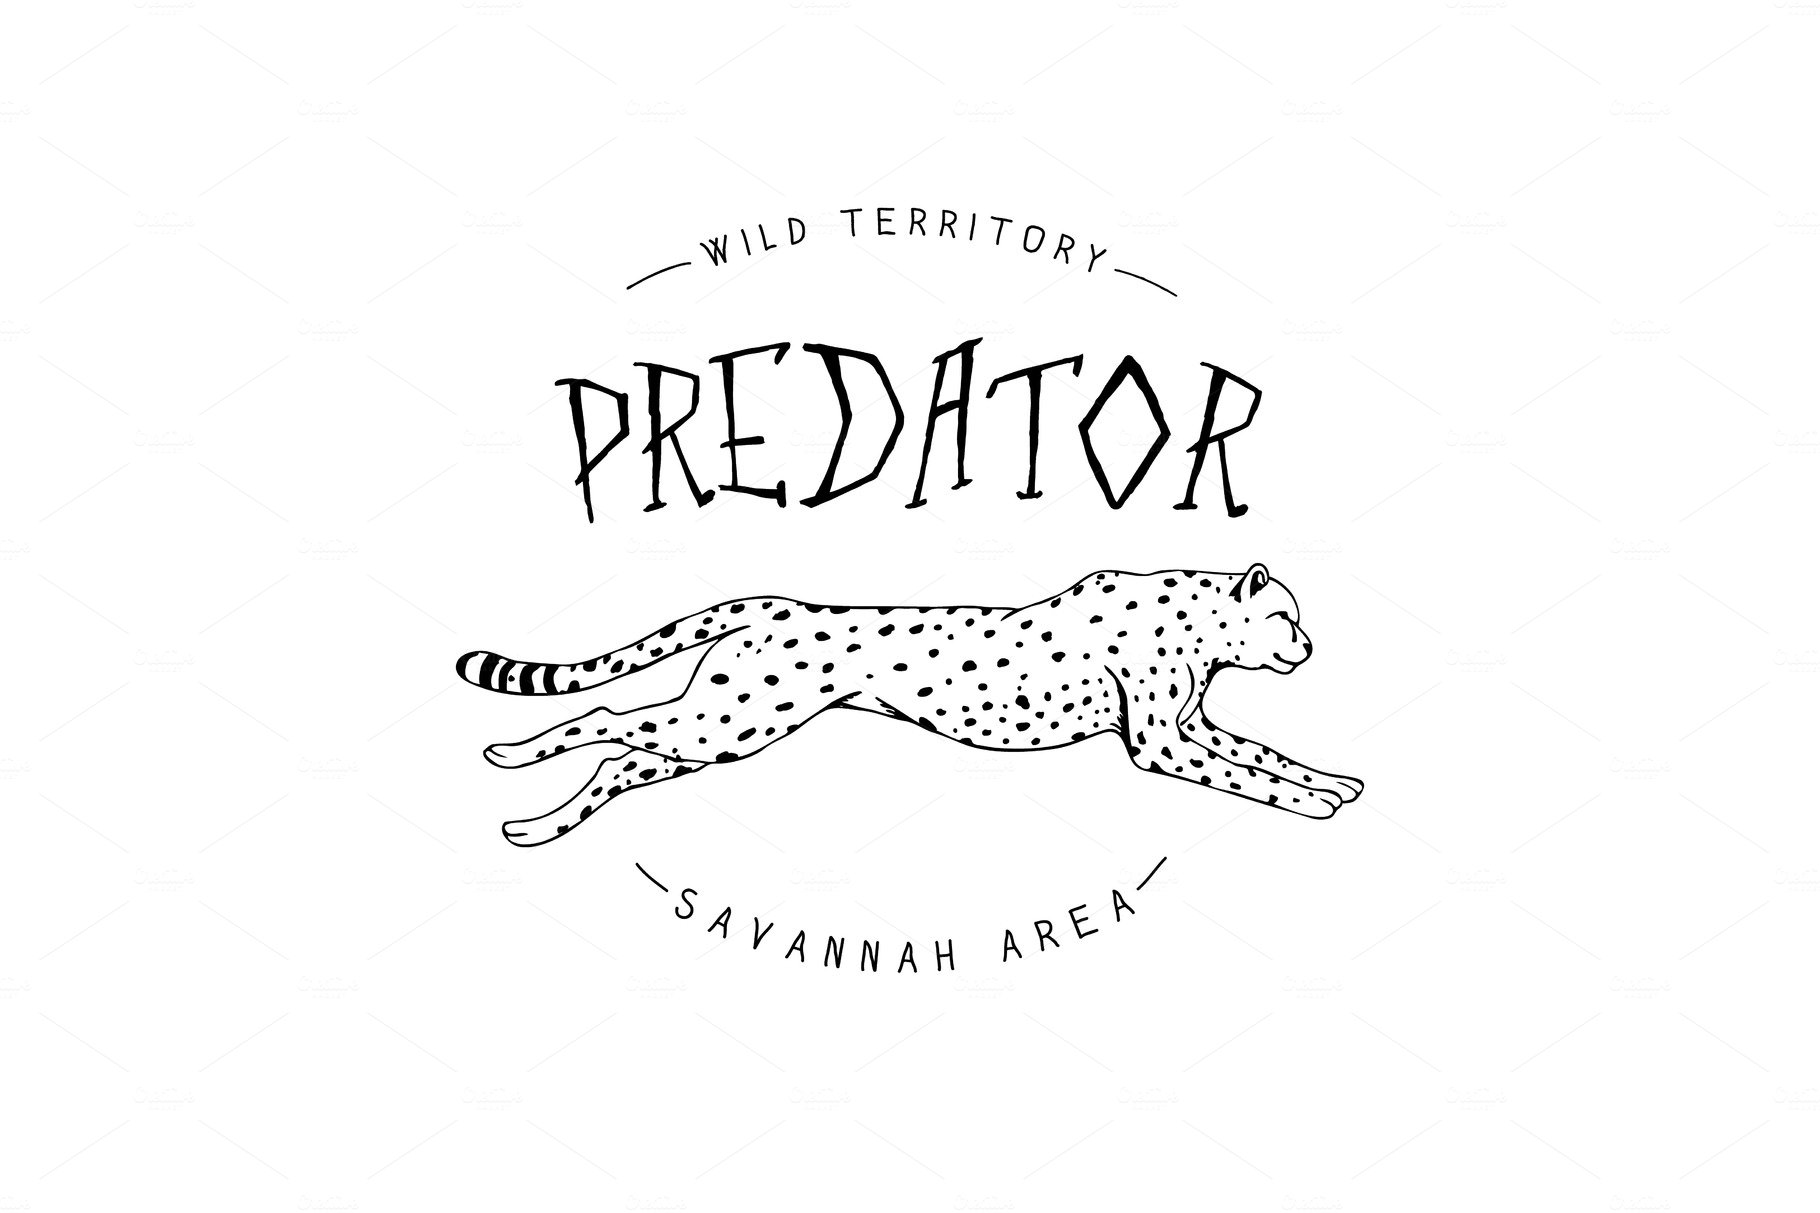 Logo with cheetah cover image.